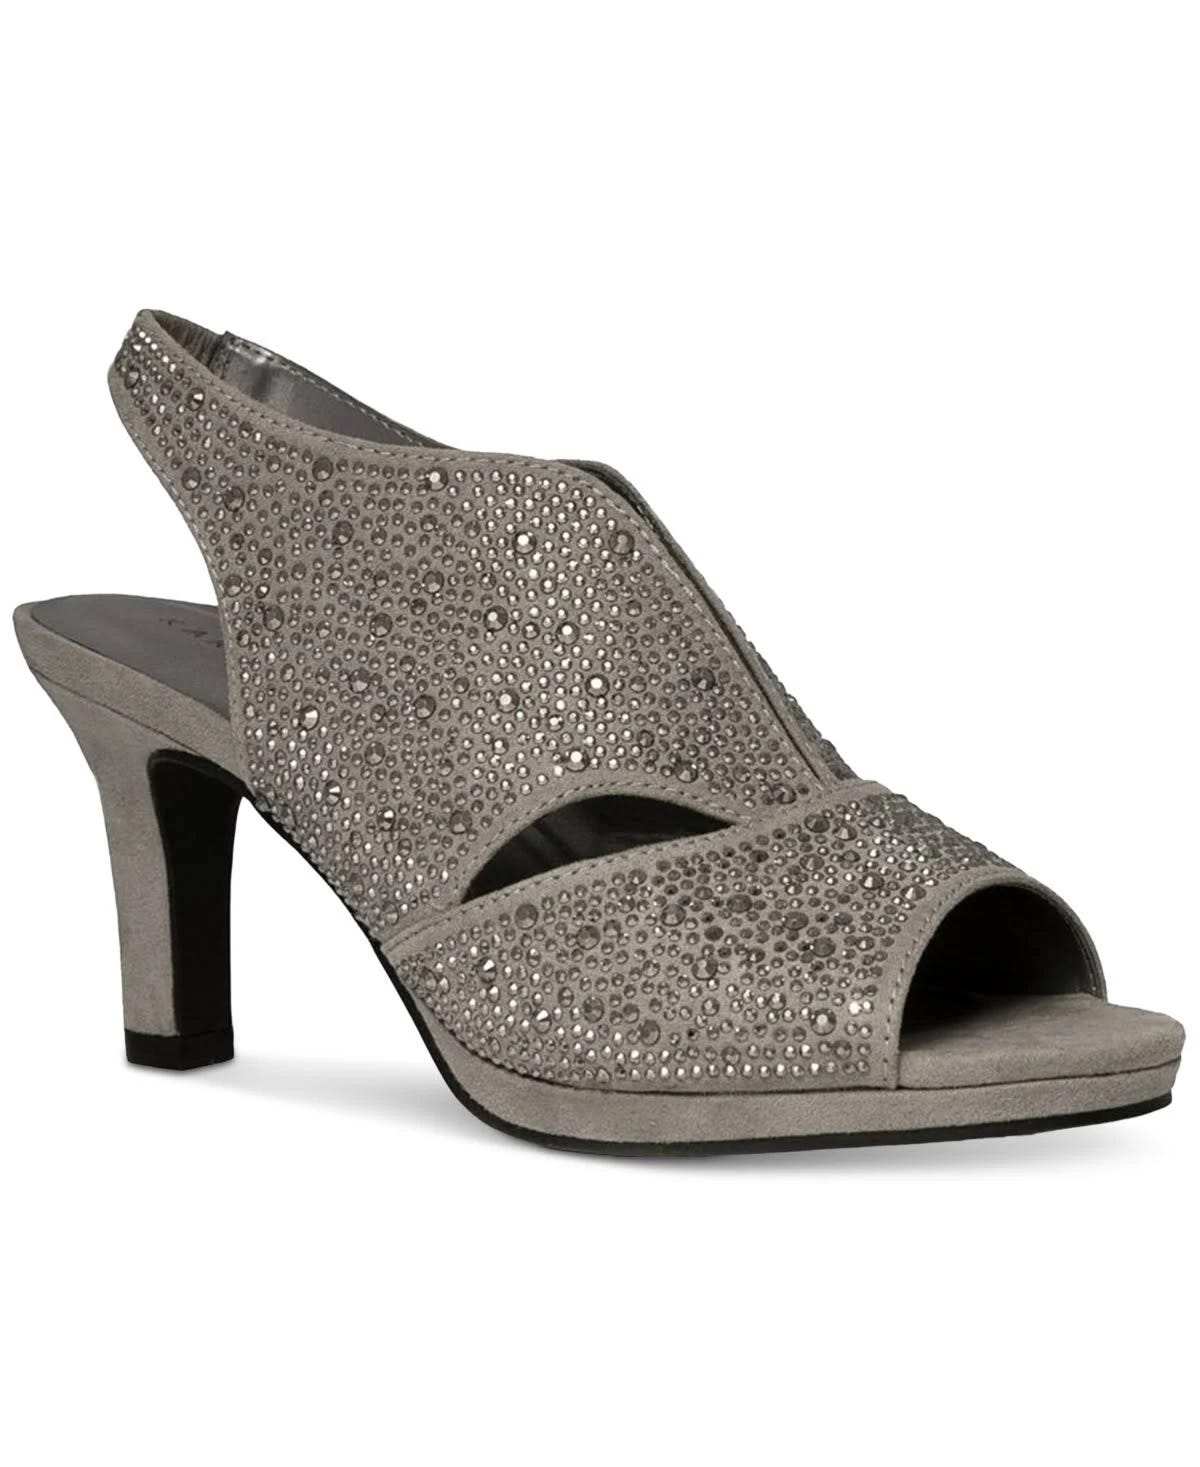 Glamorous Cut Out Peep Toe Pumps for Women | Image